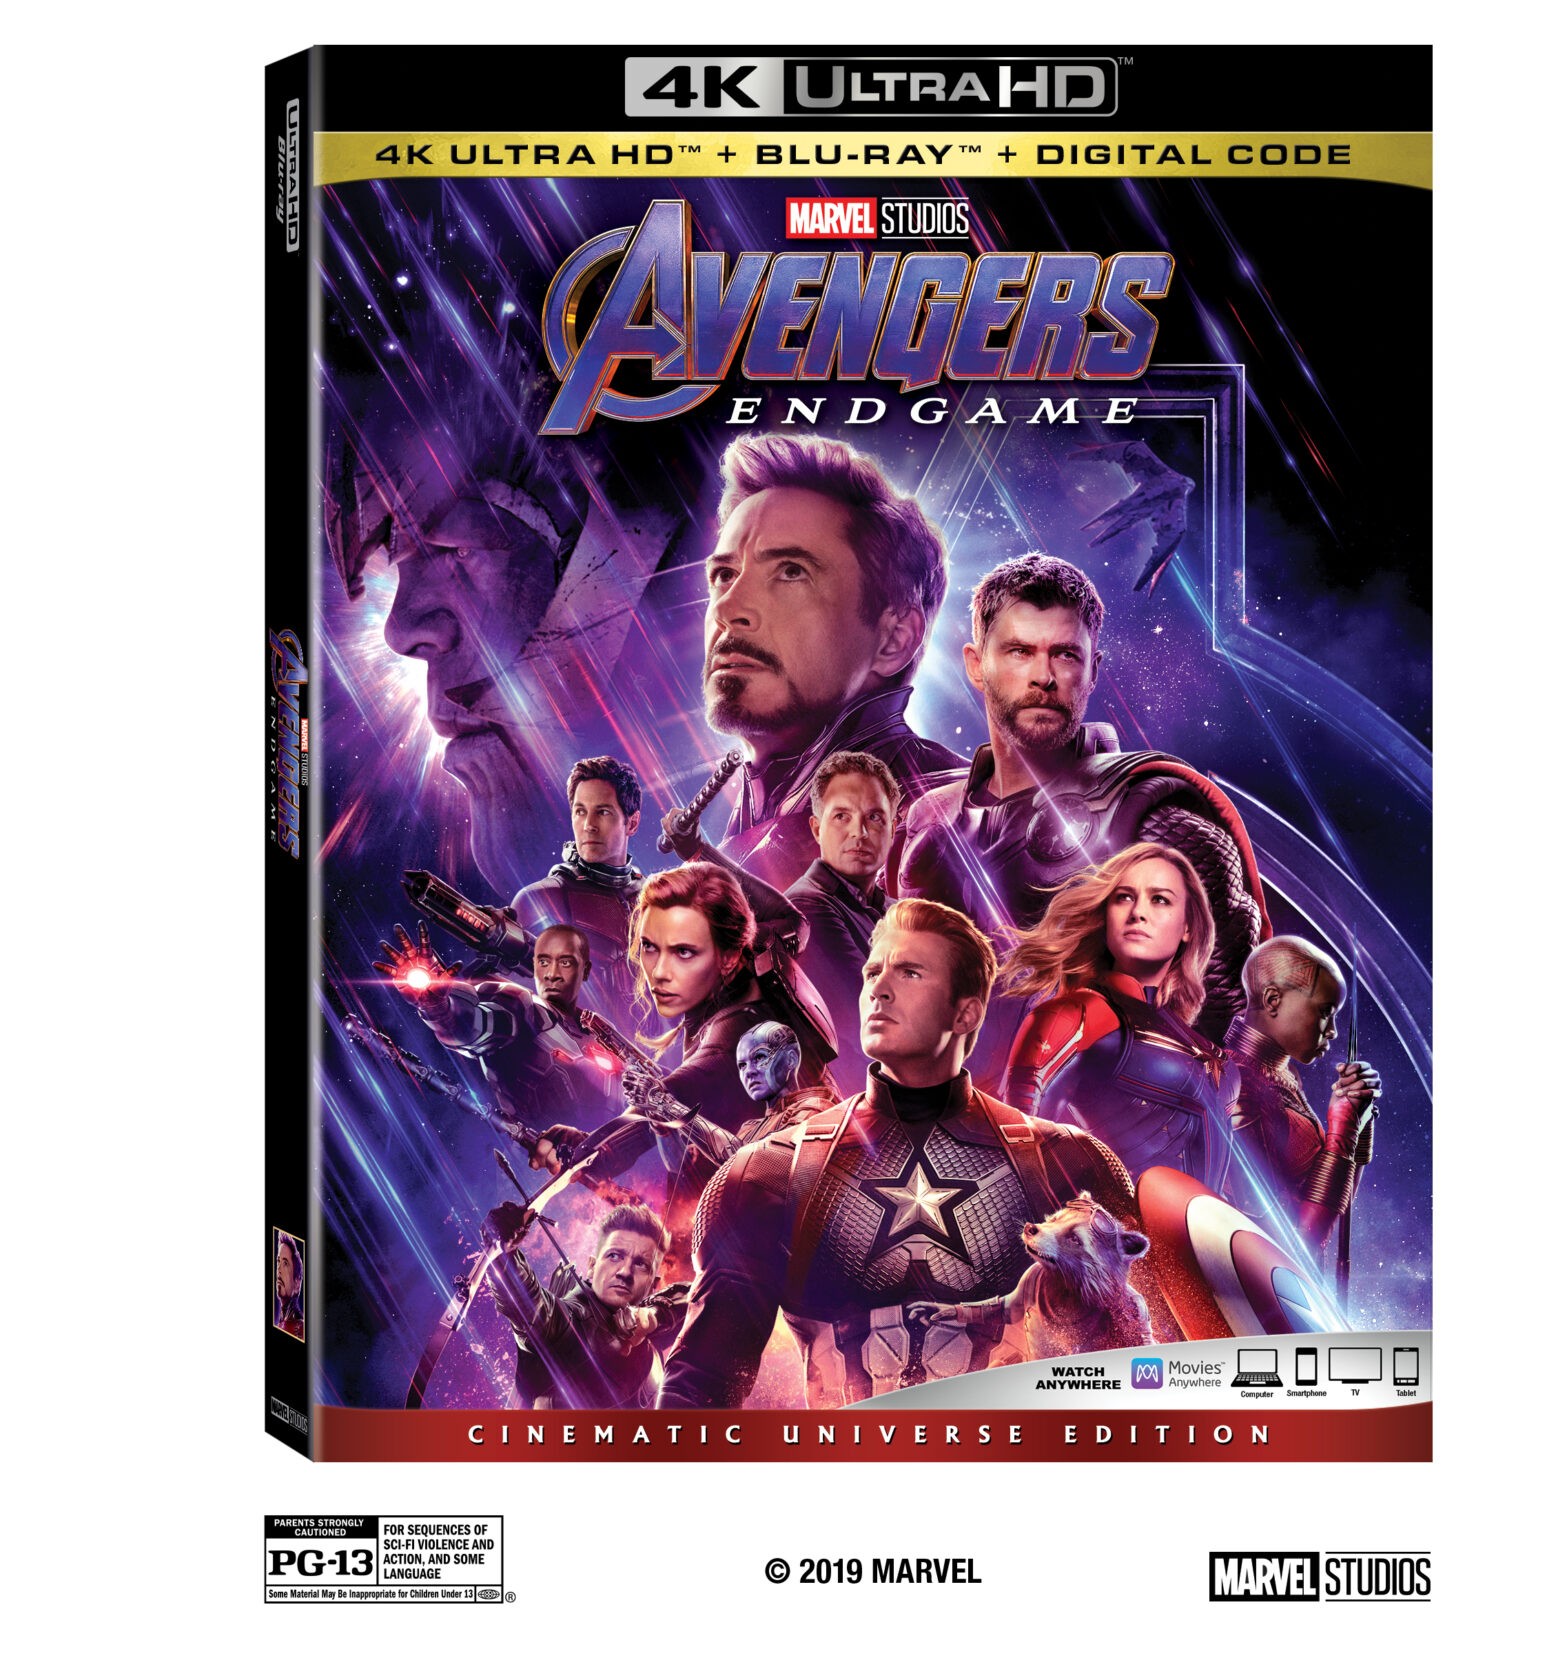 “AVENGERS: ENDGAME” RELEASES ON DIGITAL JULY 30 AND ON BLU RAY™ AUG. 13